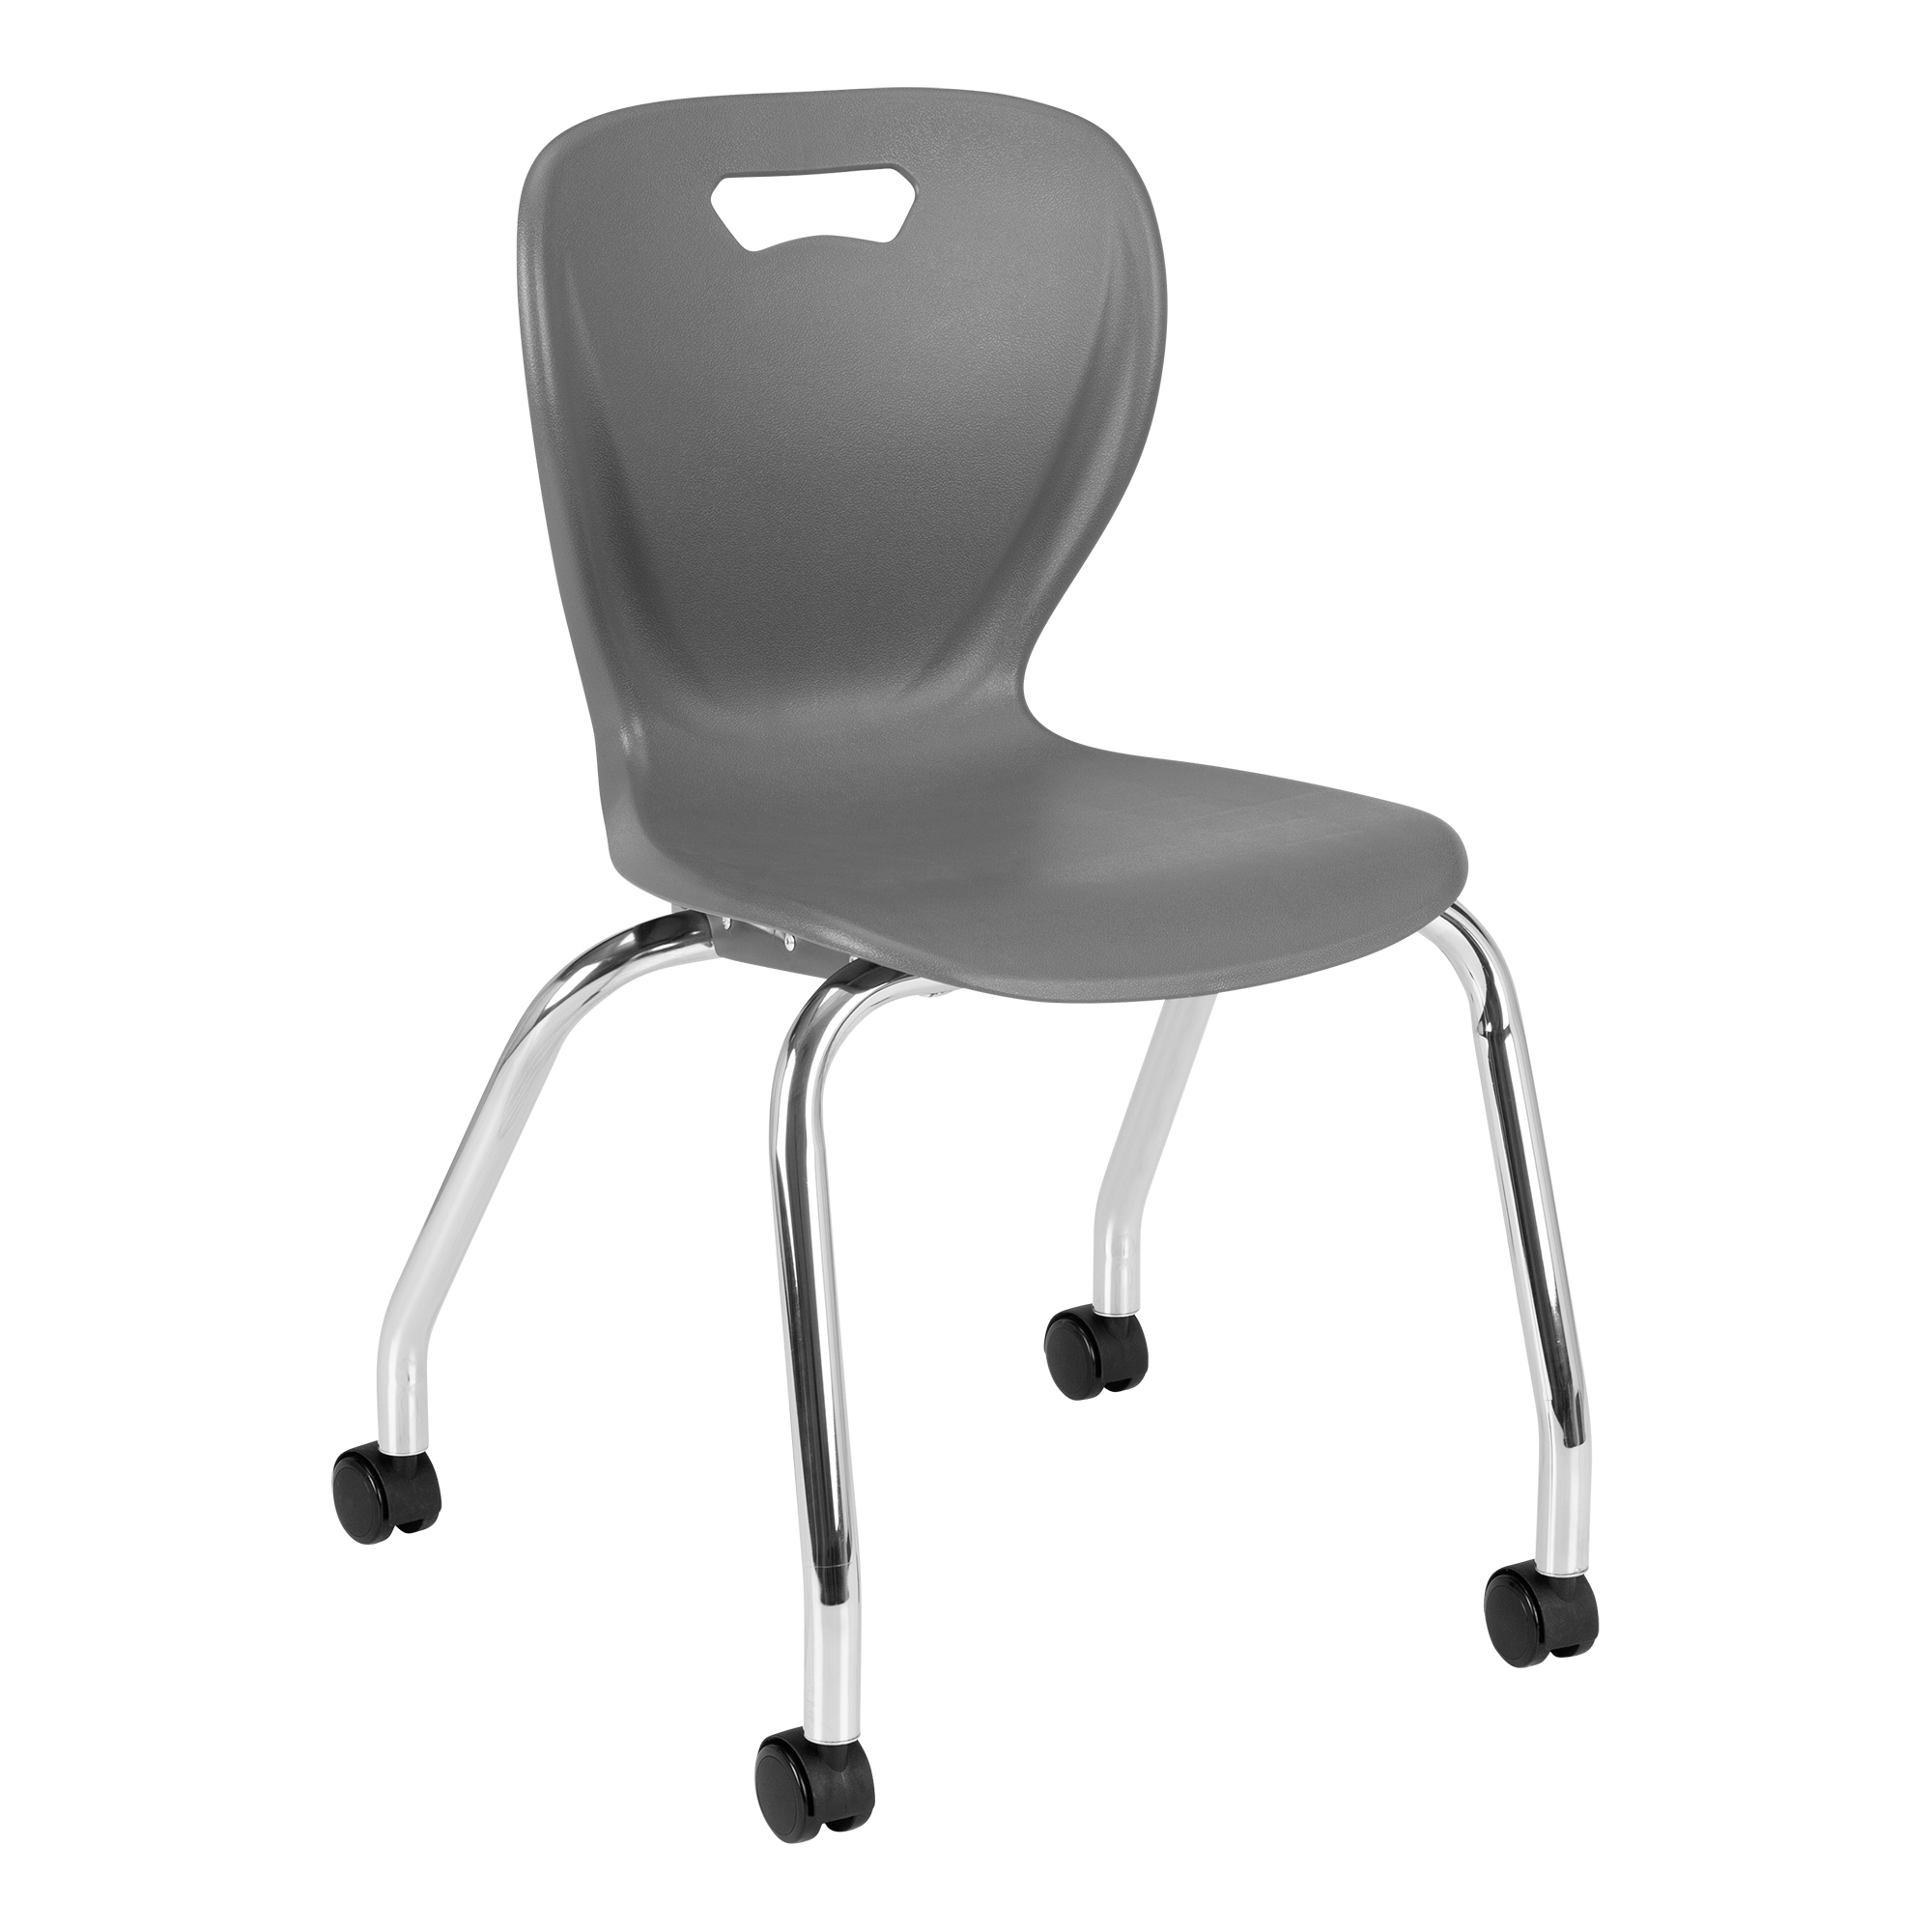 Learniture Shapes Series School Chair Pack of 4 LNT-INM3016NV-SO 16 Seat Height Navy